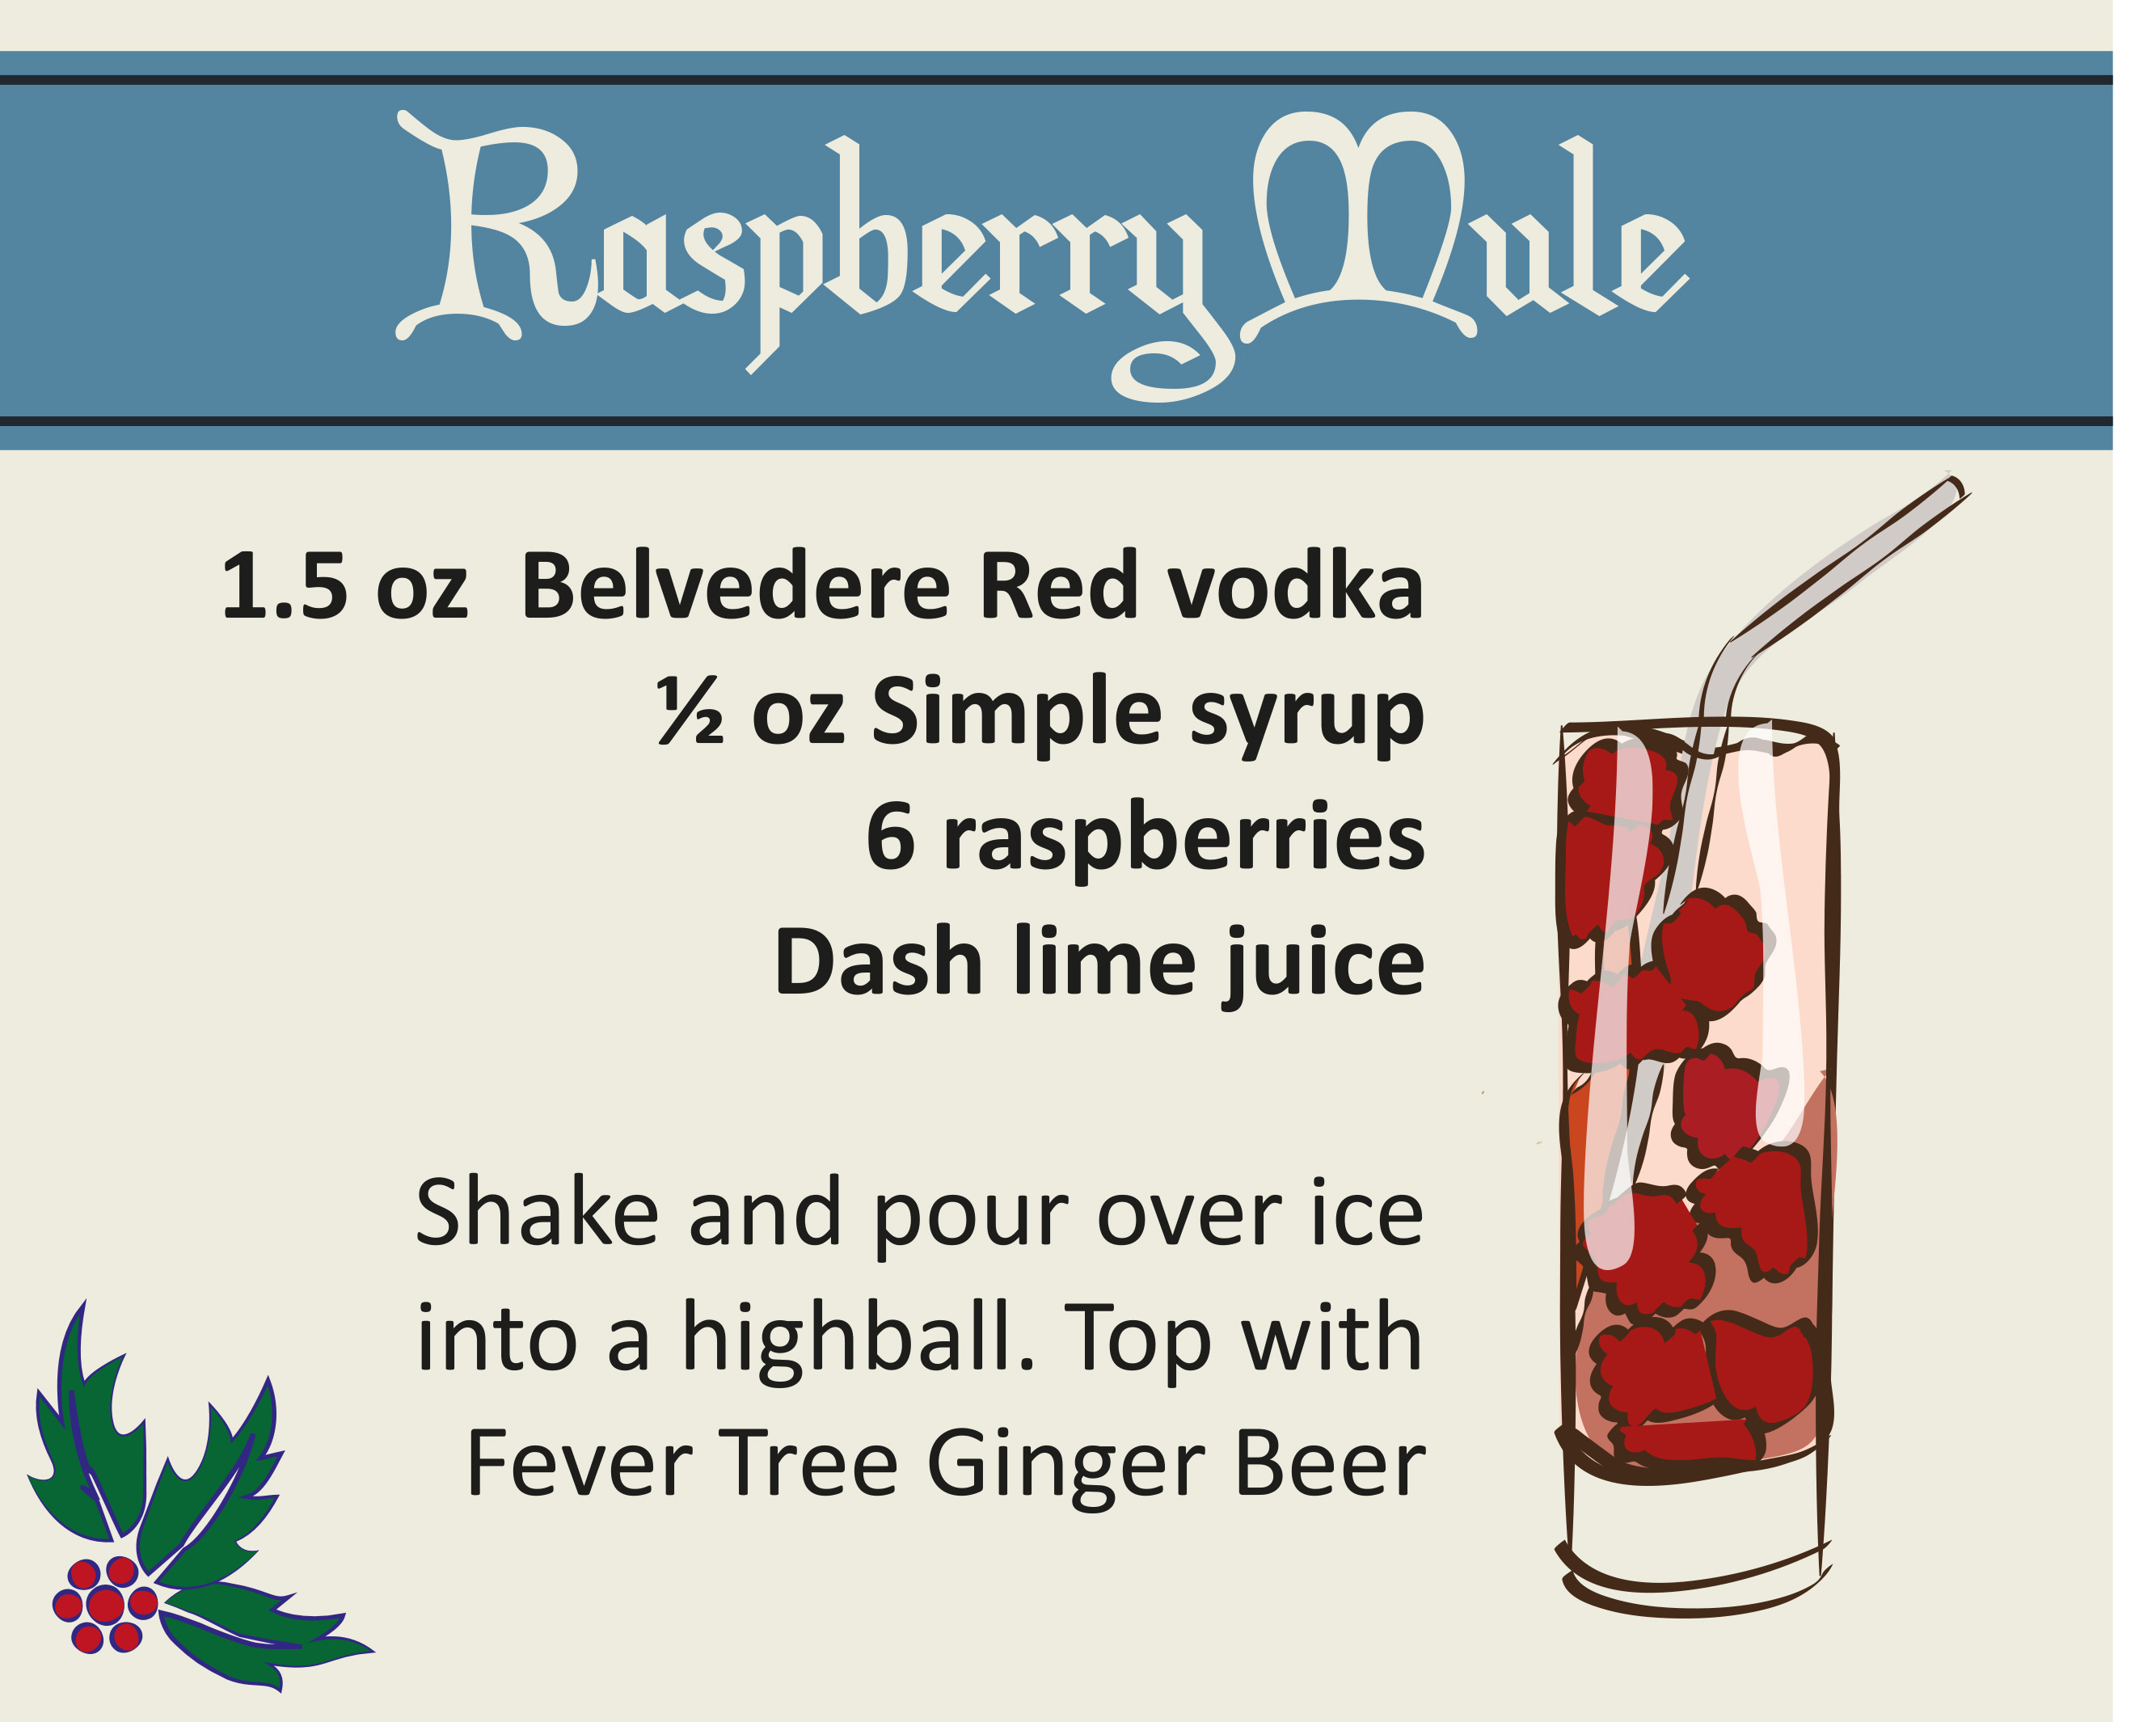 1.5 oz (BELVEDERE) RED ½ oz Simple syrup 6 raspberries Dash lime juice 1. Shake and pour over ice into a highball glass. 2. Top with Fever Tree Ginger Beer. 3. Serve!